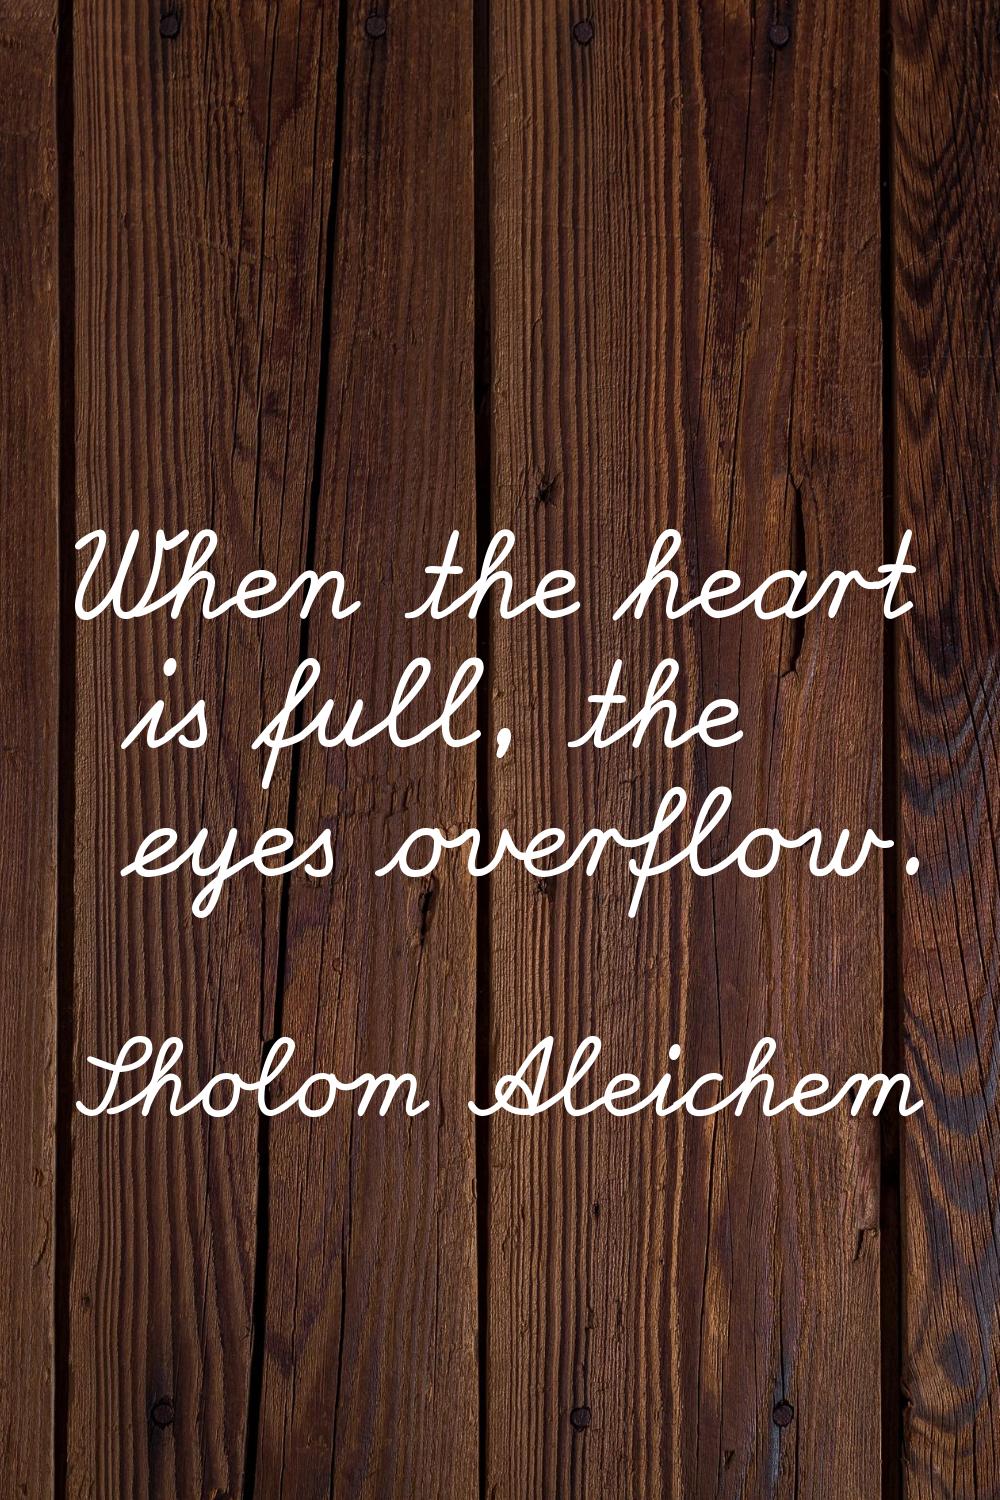 When the heart is full, the eyes overflow.